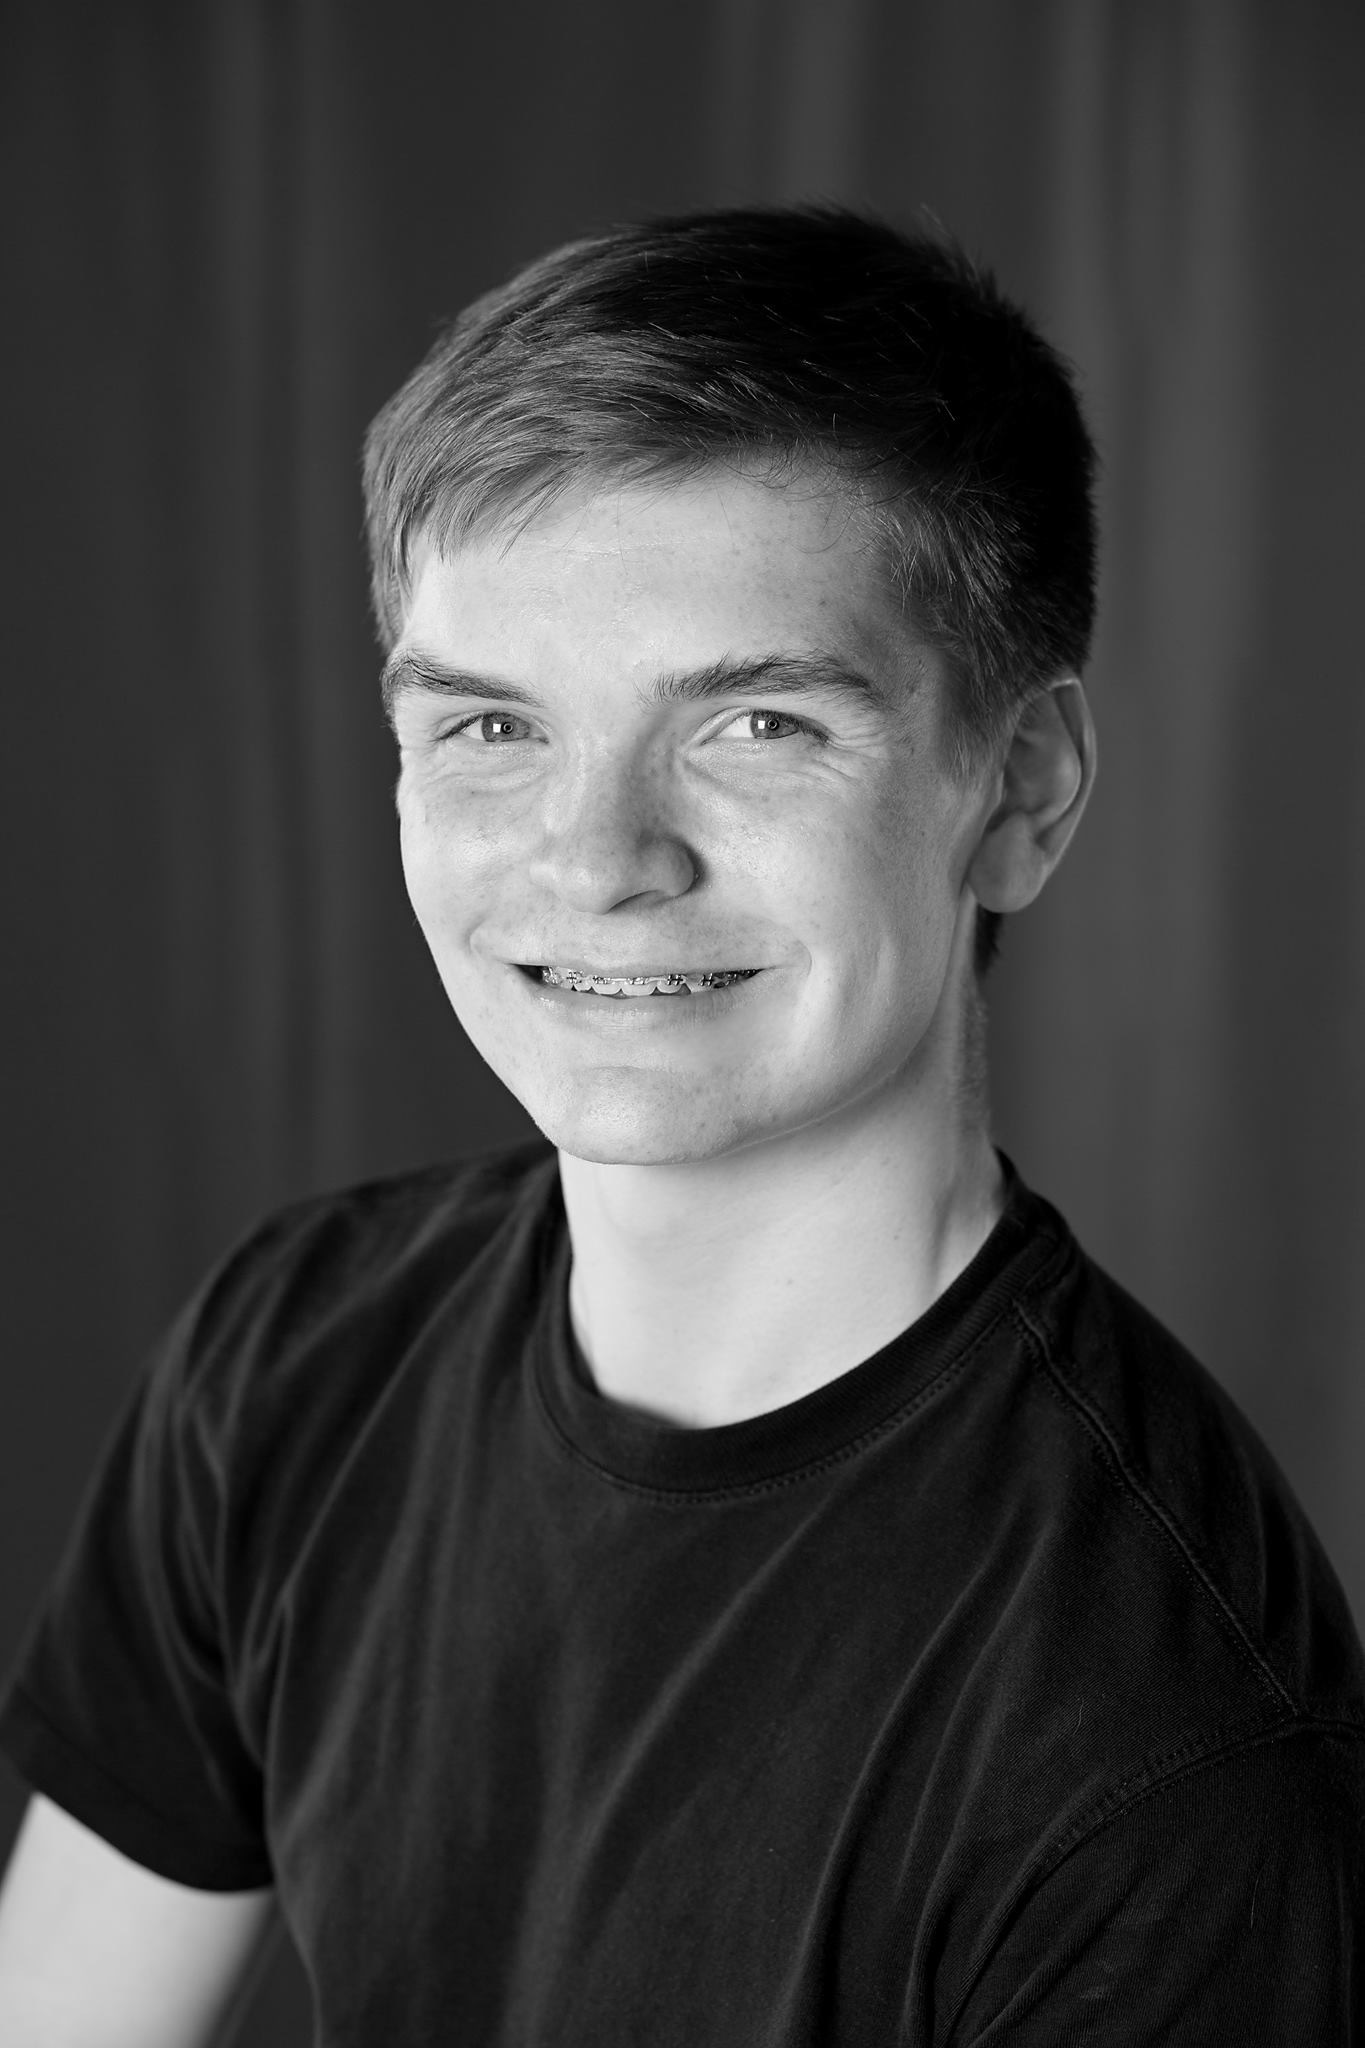 Senior Cast Member Cooper Wilson:
Cooper plays the role of Don Lockwood in 